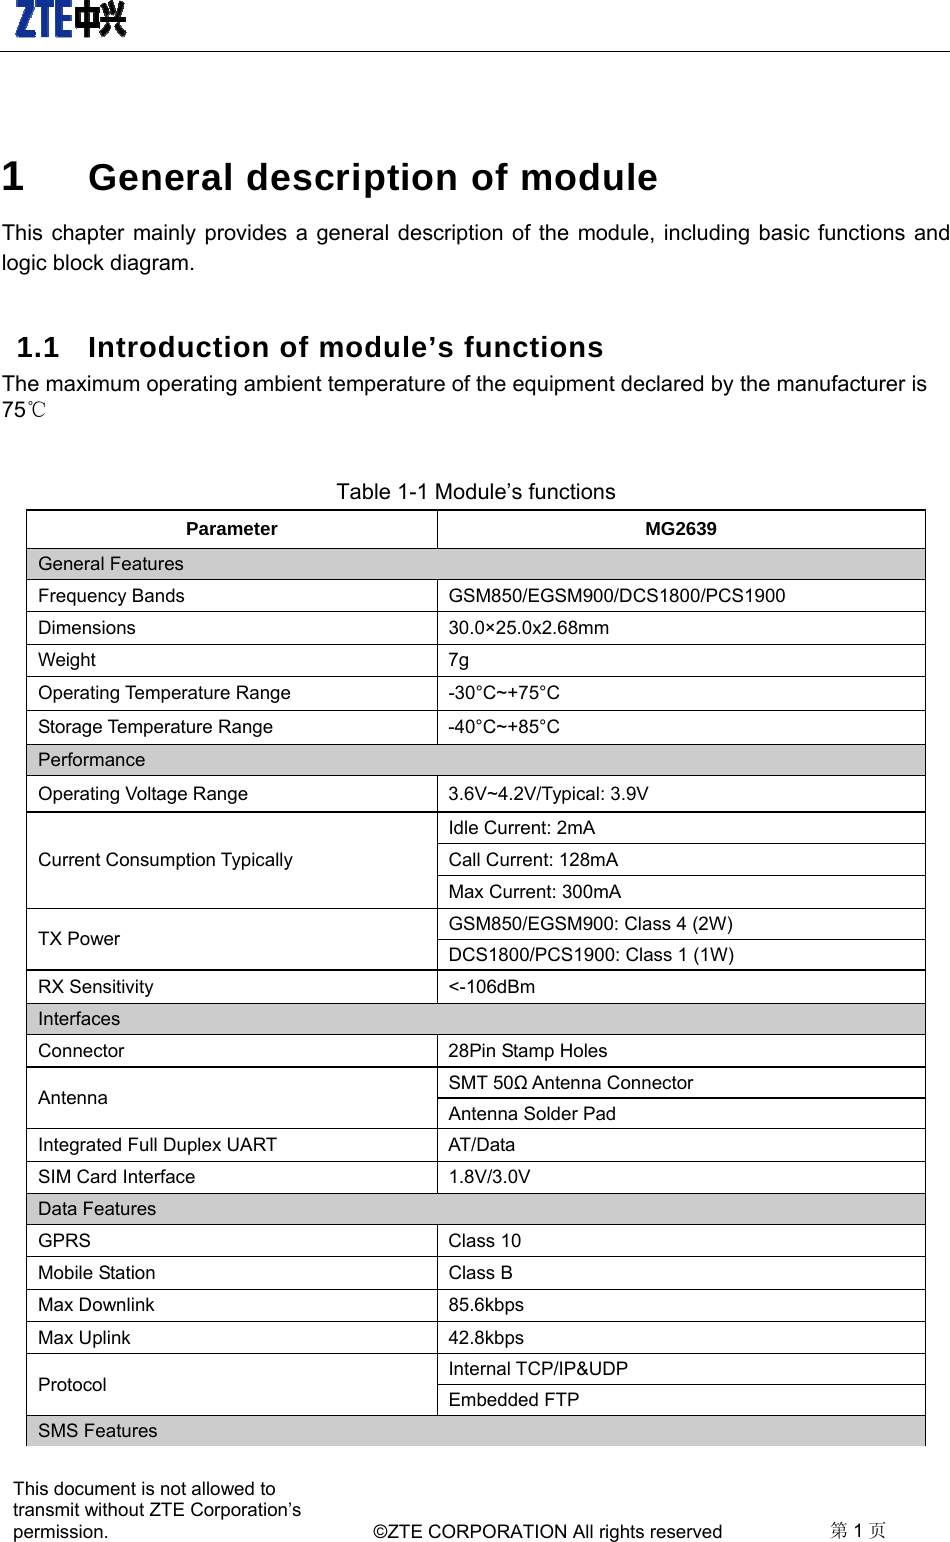   This document is not allowed to transmit without ZTE Corporation’s permission.    ©ZTE CORPORATION All rights reserved  第1页  1  General description of module   This chapter mainly provides a general description of the module, including basic functions and logic block diagram.     1.1  Introduction of module’s functions   The maximum operating ambient temperature of the equipment declared by the manufacturer is 75℃  Table 1-1 Module’s functions   Parameter MG2639 General Features Frequency Bands  GSM850/EGSM900/DCS1800/PCS1900 Dimensions 30.0×25.0x2.68mm Weight 7g Operating Temperature Range  -30°C~+75°C Storage Temperature Range  -40°C~+85°C Performance Operating Voltage Range  3.6V~4.2V/Typical: 3.9V Current Consumption Typically Idle Current: 2mA Call Current: 128mA Max Current: 300mA TX Power  GSM850/EGSM900: Class 4 (2W) DCS1800/PCS1900: Class 1 (1W) RX Sensitivity  &lt;-106dBm Interfaces Connector  28Pin Stamp Holes Antenna  SMT 50Ω Antenna Connector Antenna Solder Pad Integrated Full Duplex UART  AT/Data SIM Card Interface 1.8V/3.0V Data Features GPRS Class 10 Mobile Station  Class B Max Downlink  85.6kbps Max Uplink  42.8kbps Protocol Internal TCP/IP&amp;UDP Embedded FTP SMS Features 